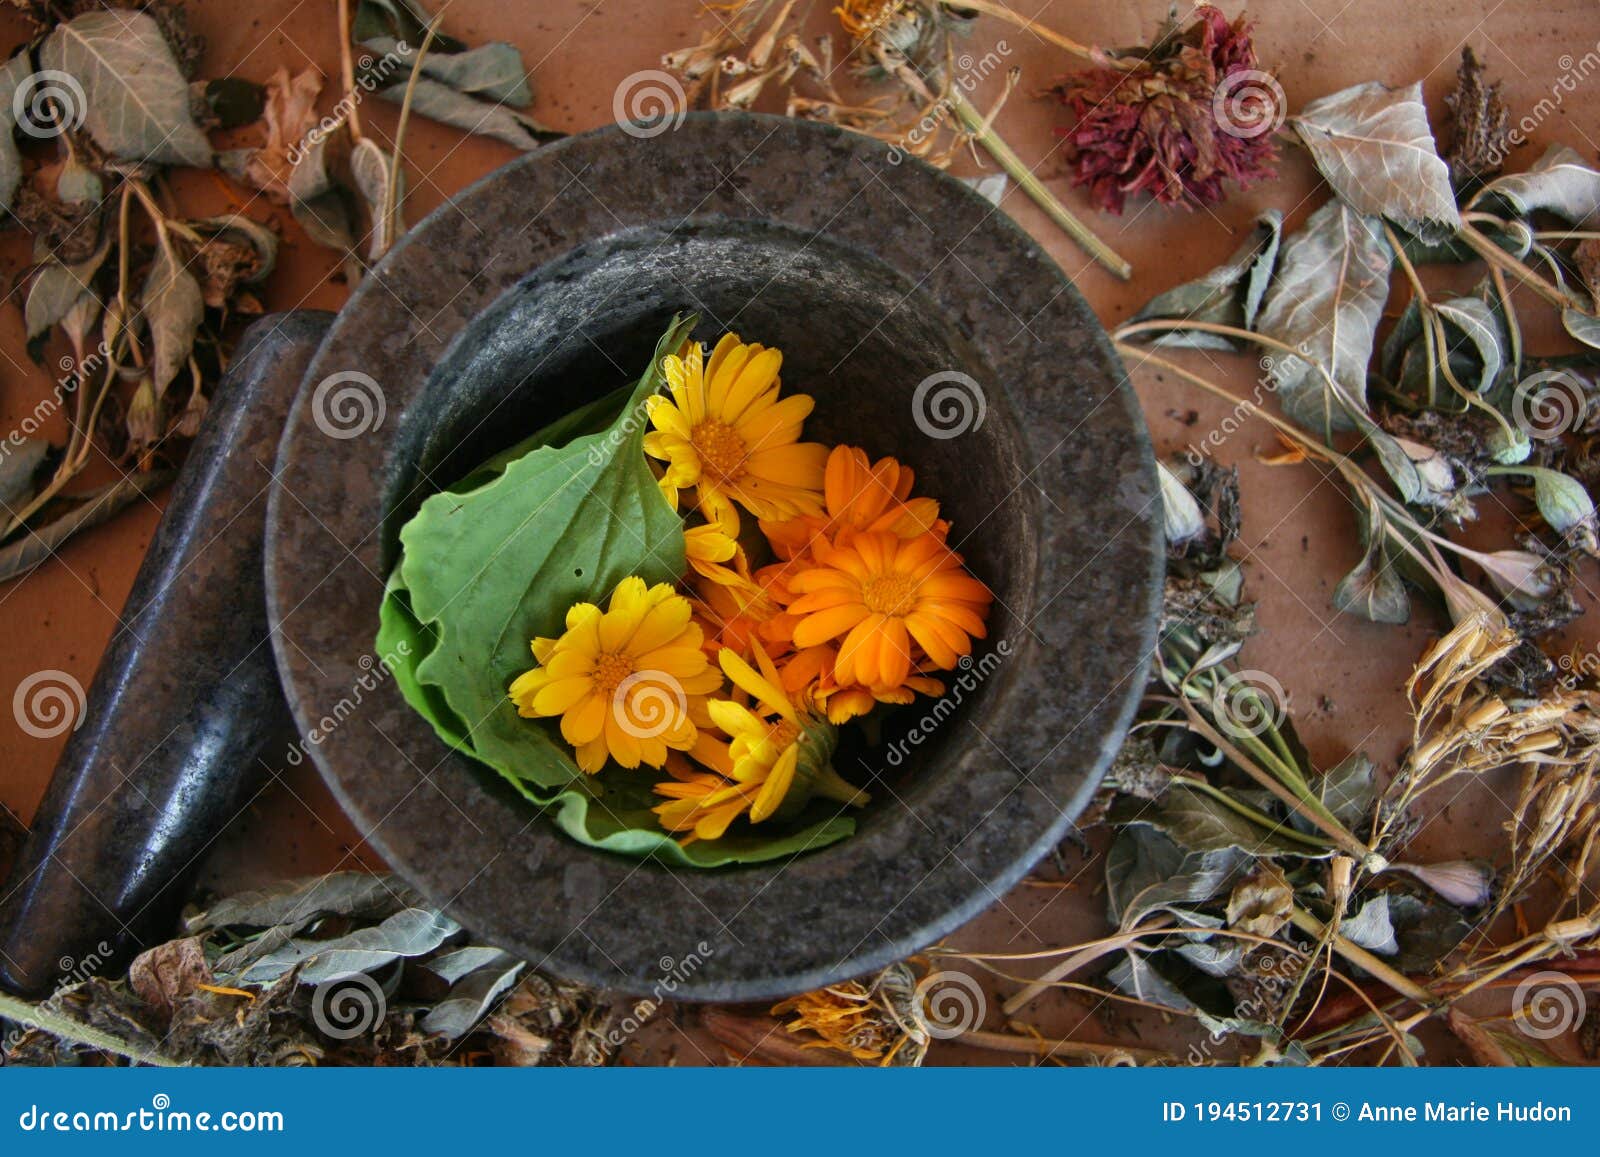 mortar and pestle, herbalism, naturopathy, flowers healing herbs, dried flowers, medicinal, autumn, october, still life, floral